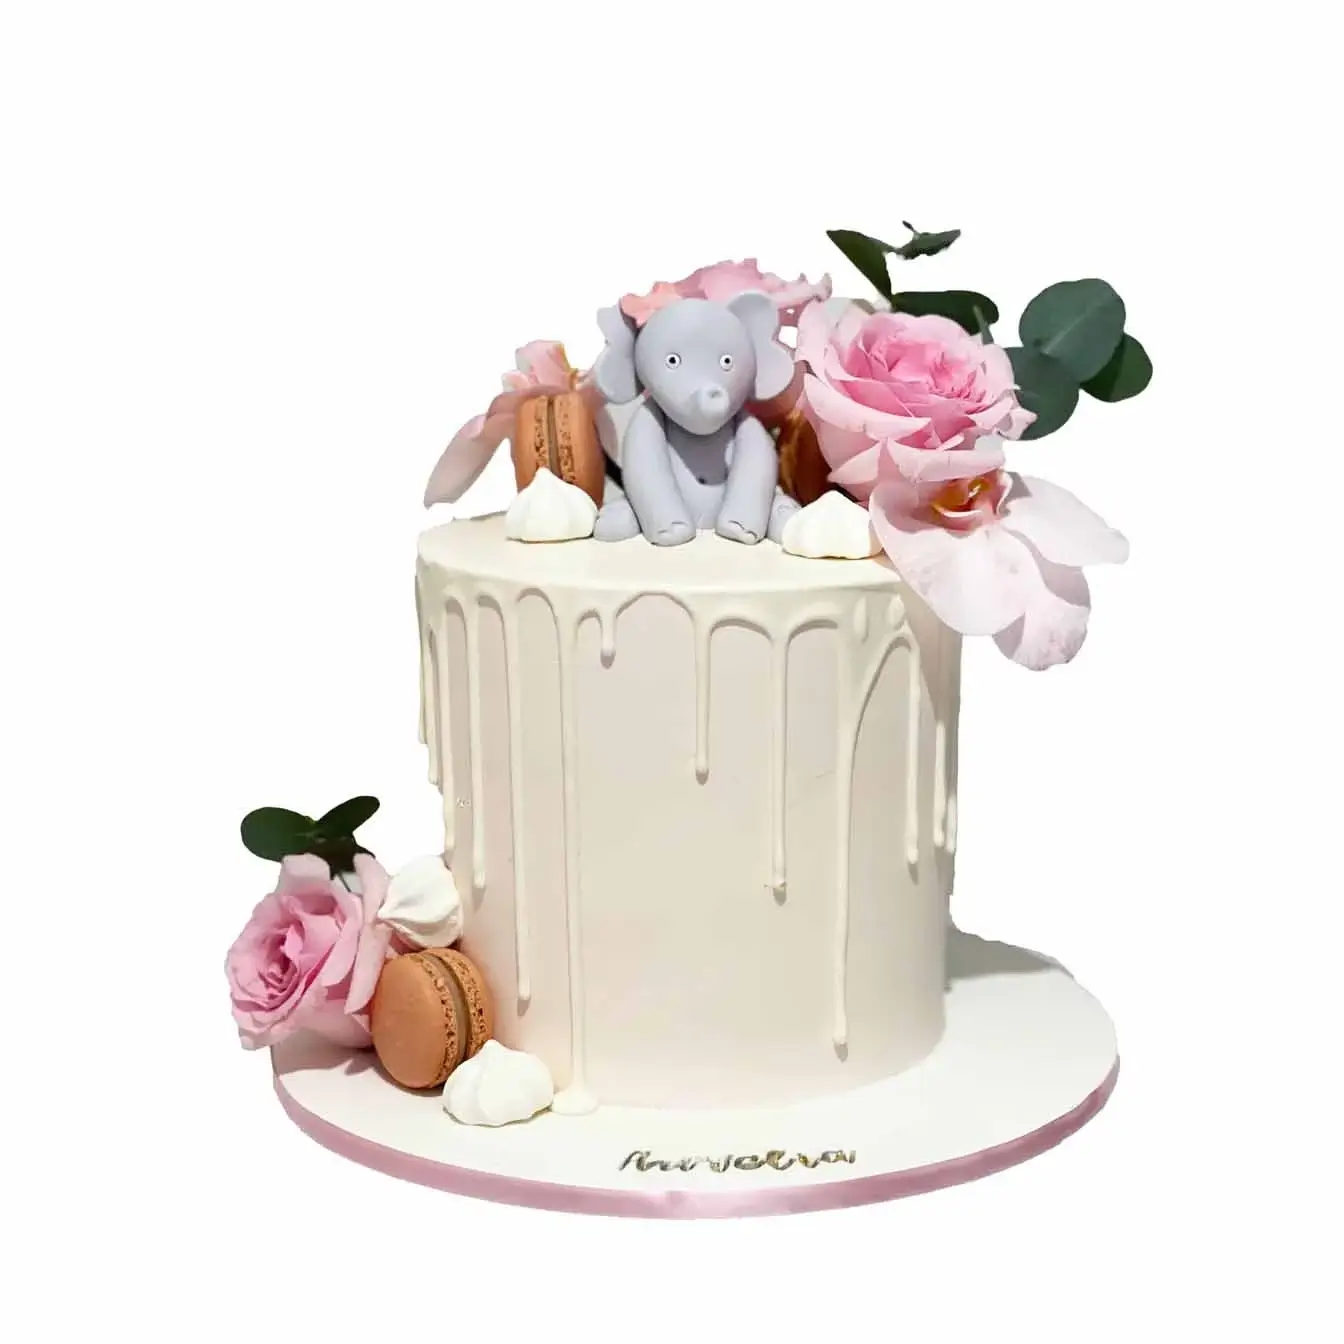 Floral Elephant Elegance Cake - A pink cake with a white drip, adorned with an edible elephant and fresh flowers, a stunning centerpiece for celebrations filled with grace and whimsy.